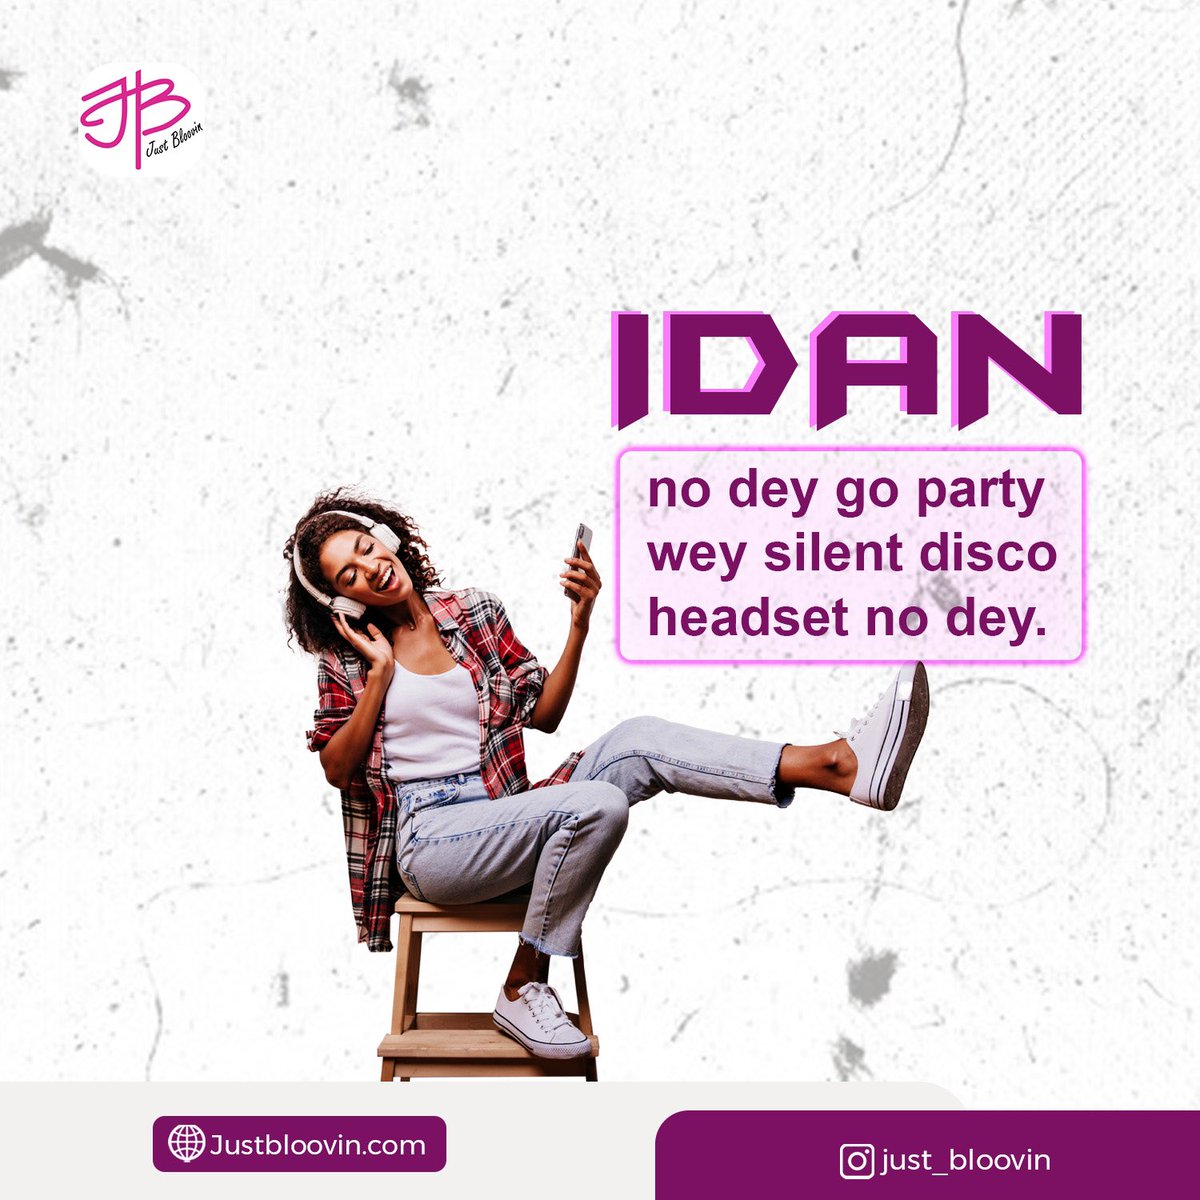 If it’s not a silent disco headset party, it is not a party for Idan 😌💥

Make your event suitable for your Idan attendees. Book the silent disco headsets now.

#justbloovin #ibloov #idan #silentdiscoheadset #360camera #photobooth